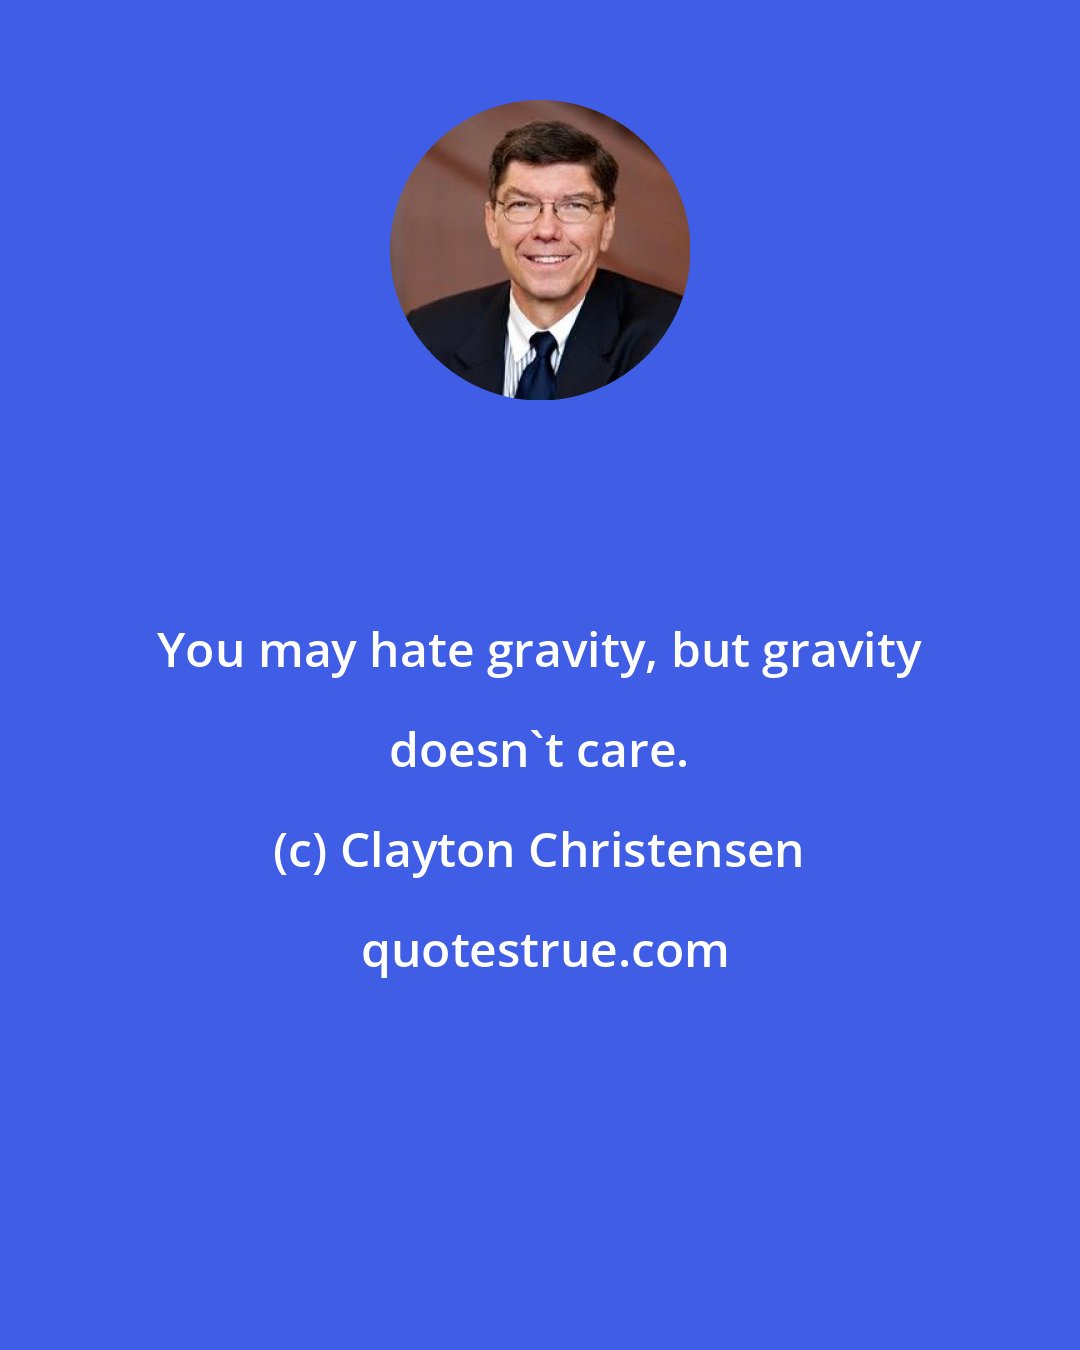 Clayton Christensen: You may hate gravity, but gravity doesn't care.